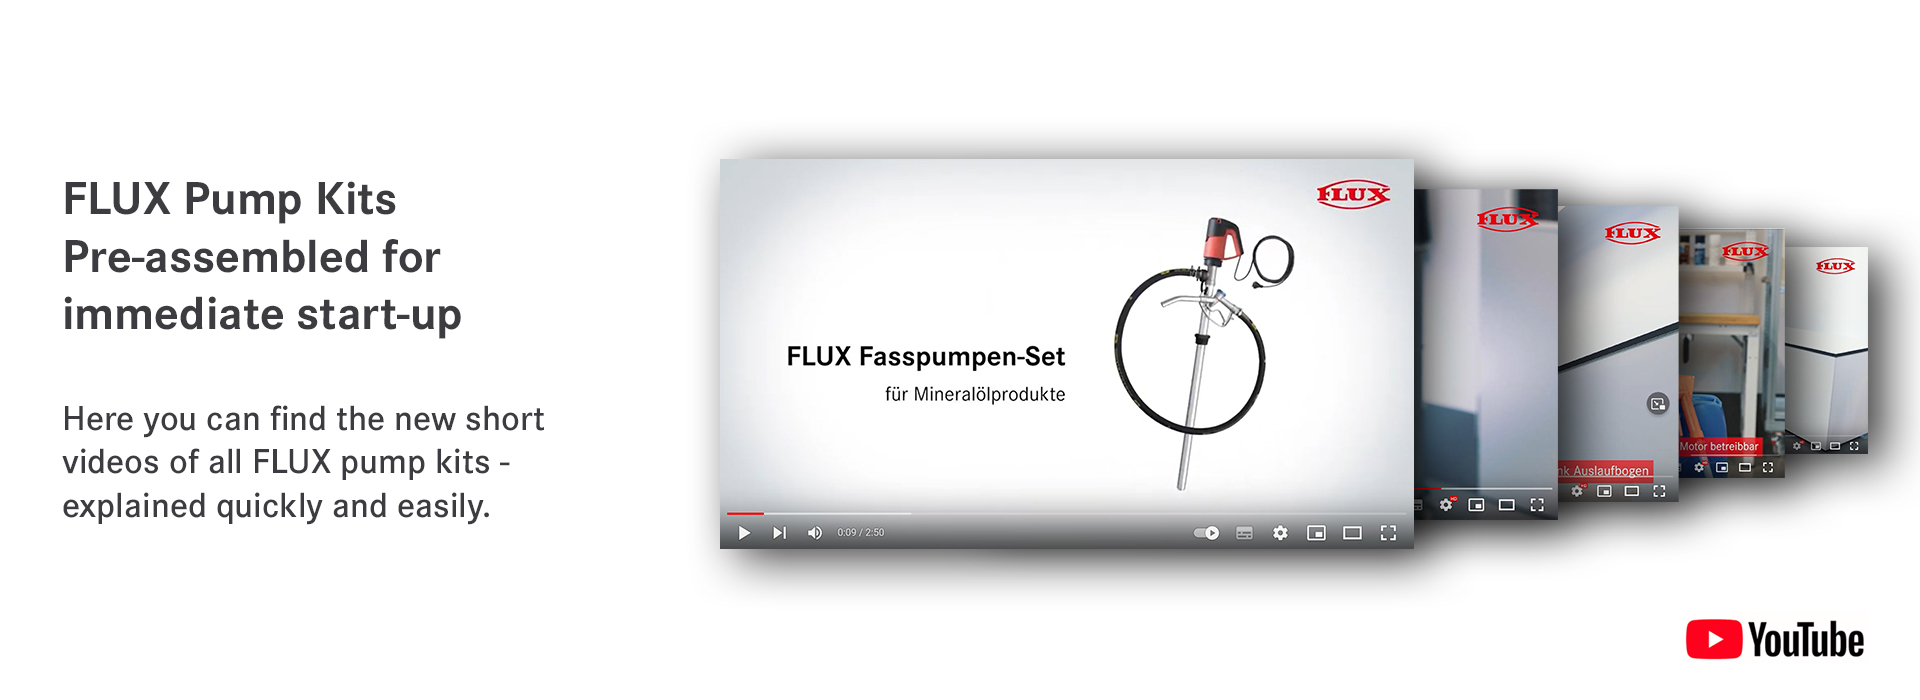 FLUX Drum and Container Pumps